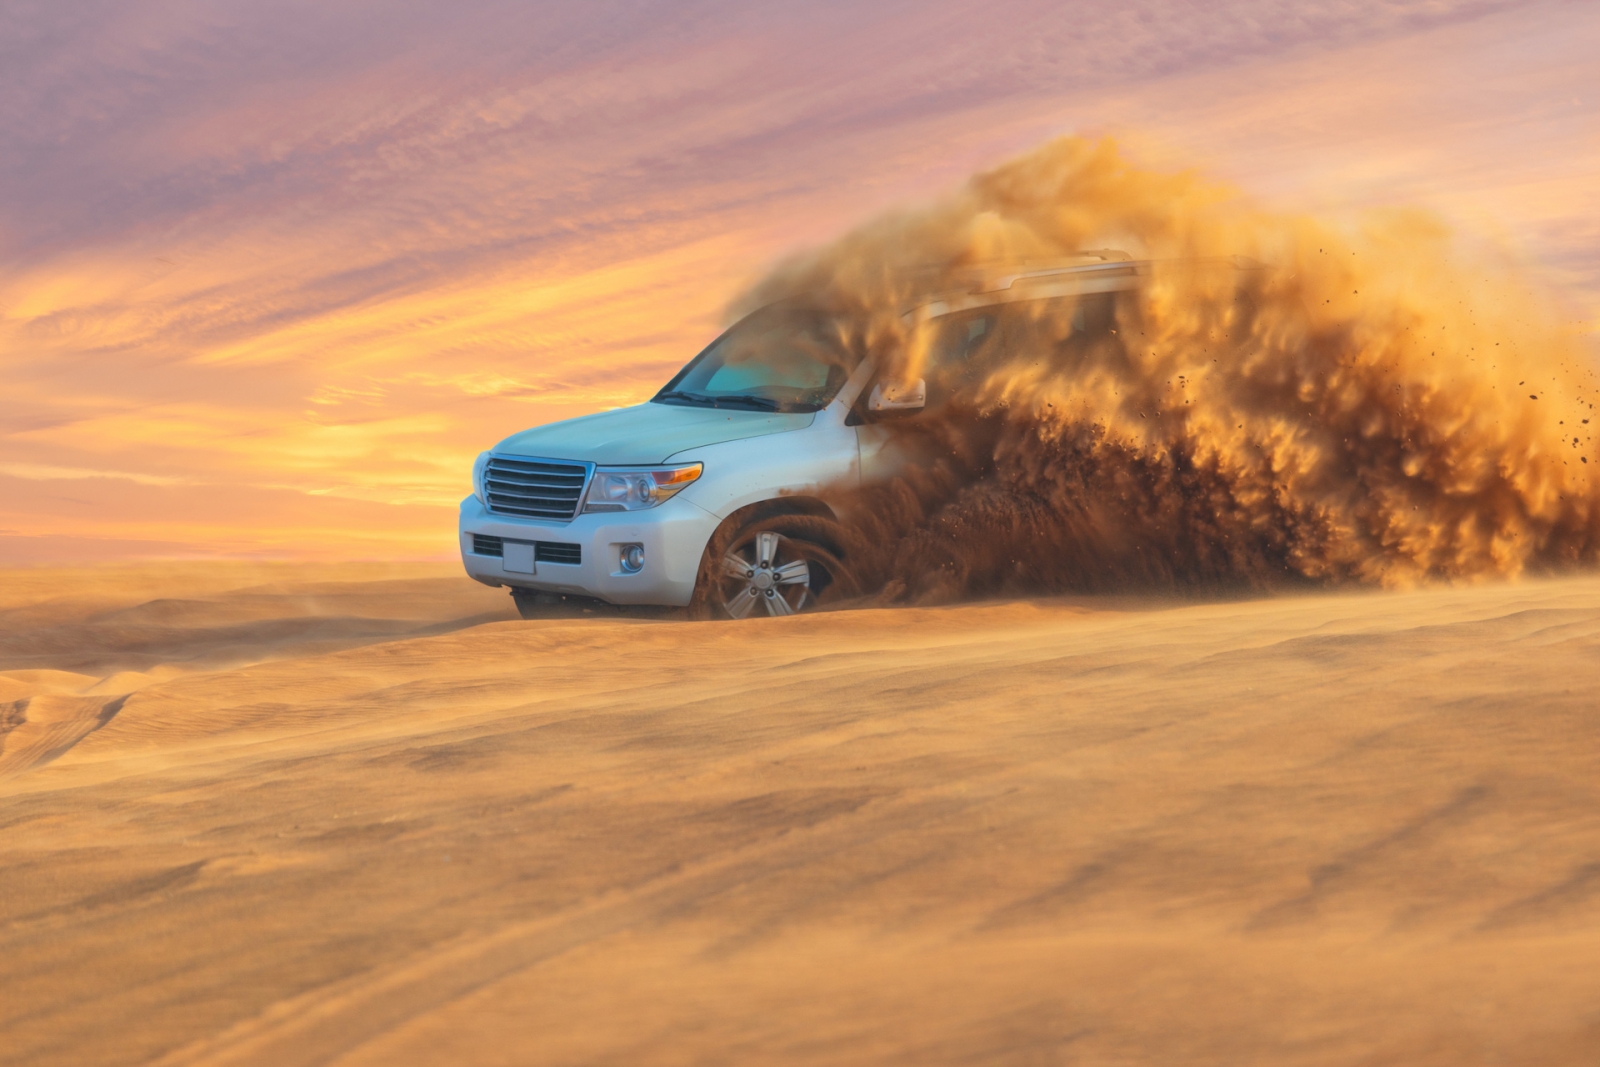 Off-road adventure with SUV in Arabian Desert at sunset.